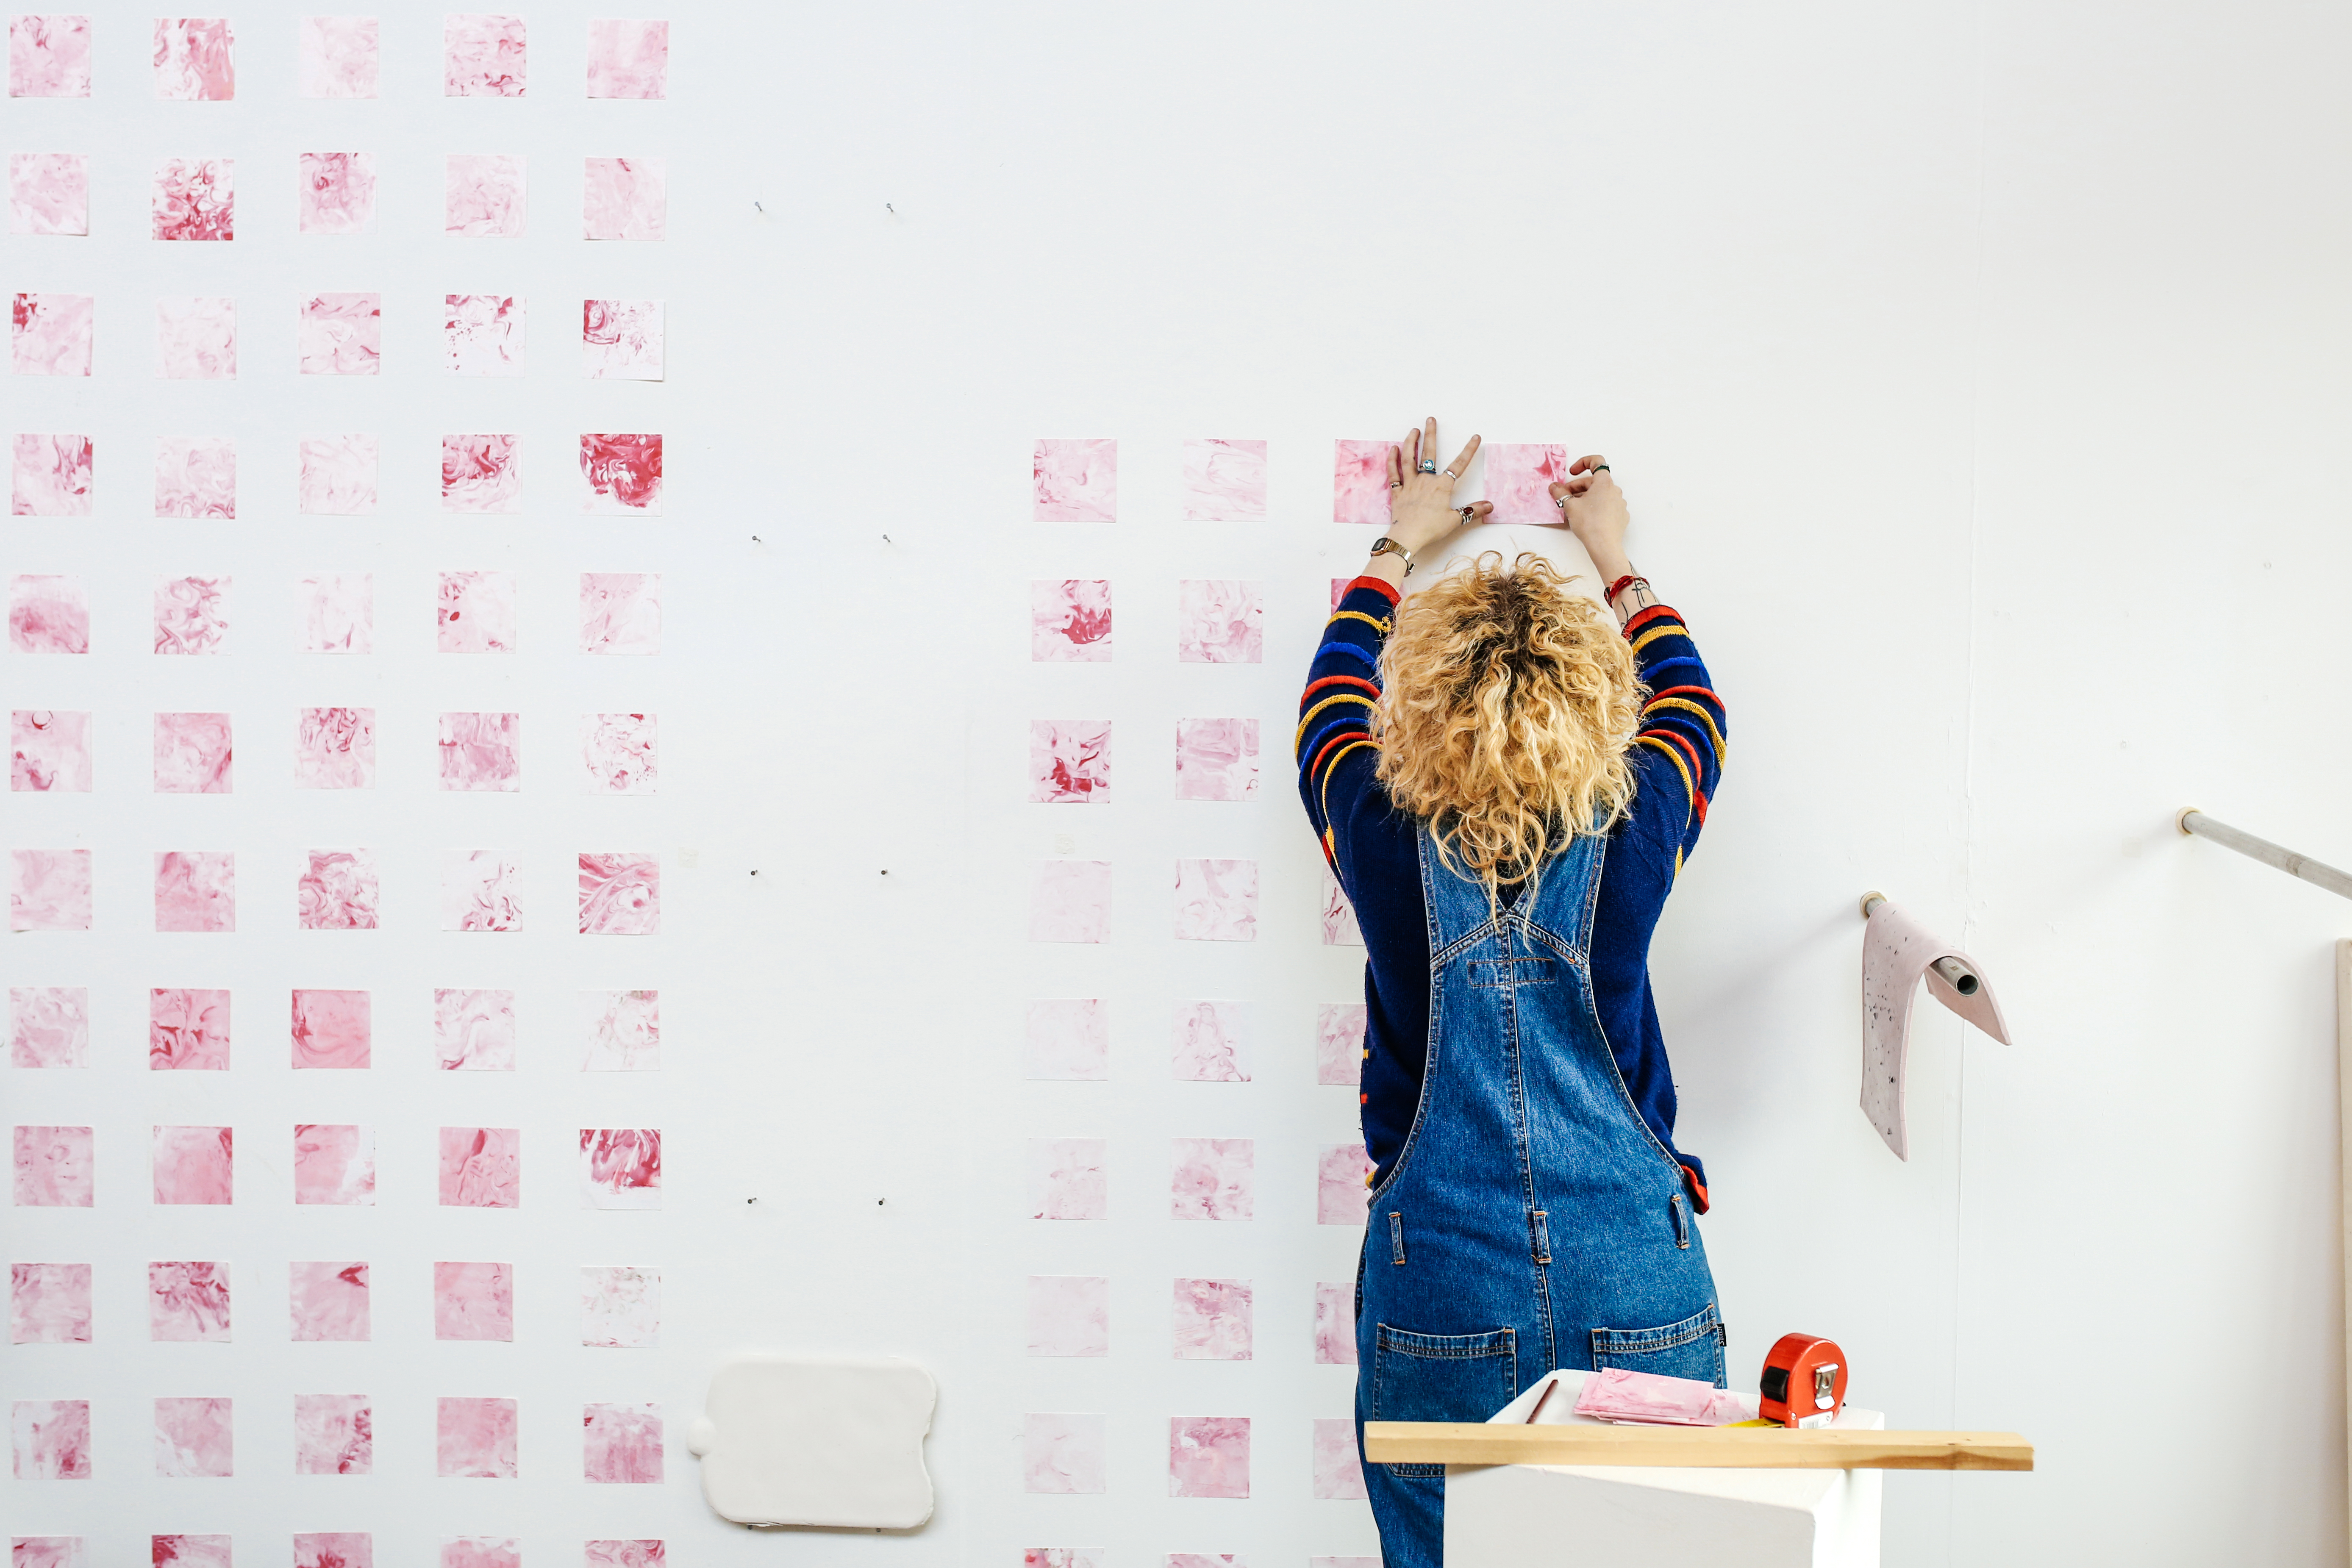 Student creating art on a white wall